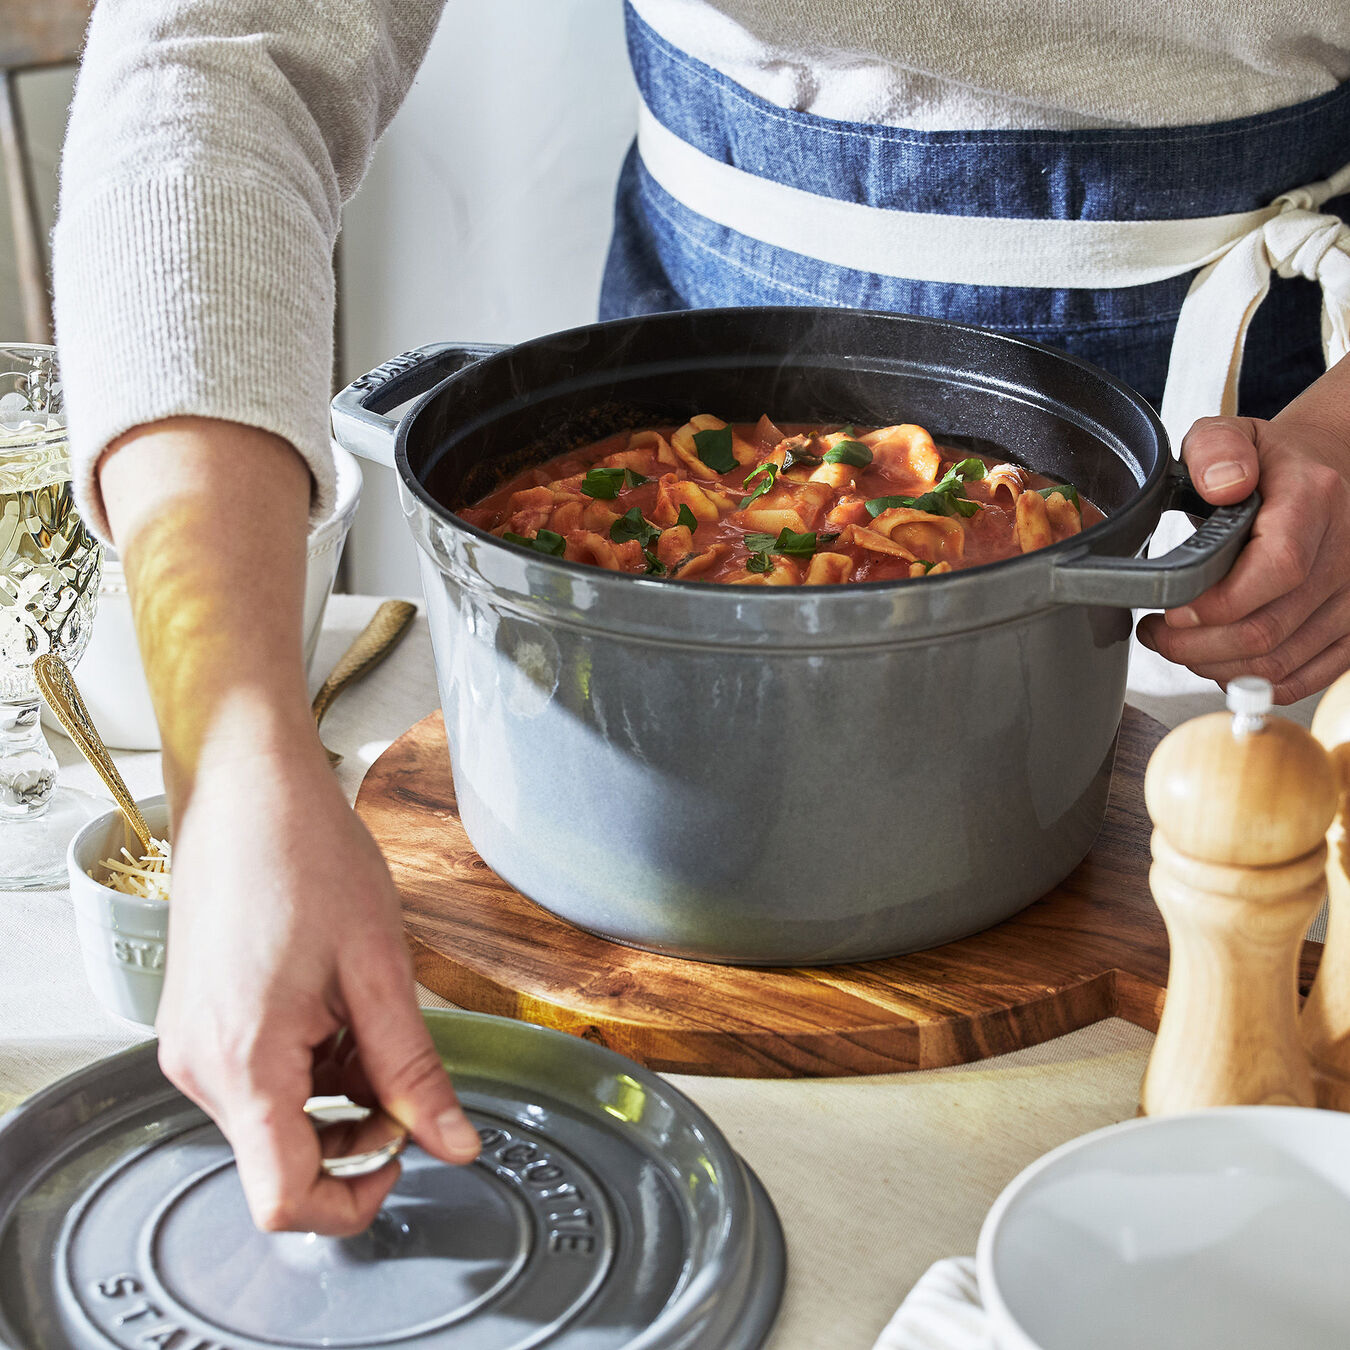 hands hold the handle and reach for the lid of a dutch oven filled with stew. scene is set on a table top with pepper mill and a glass of wine.